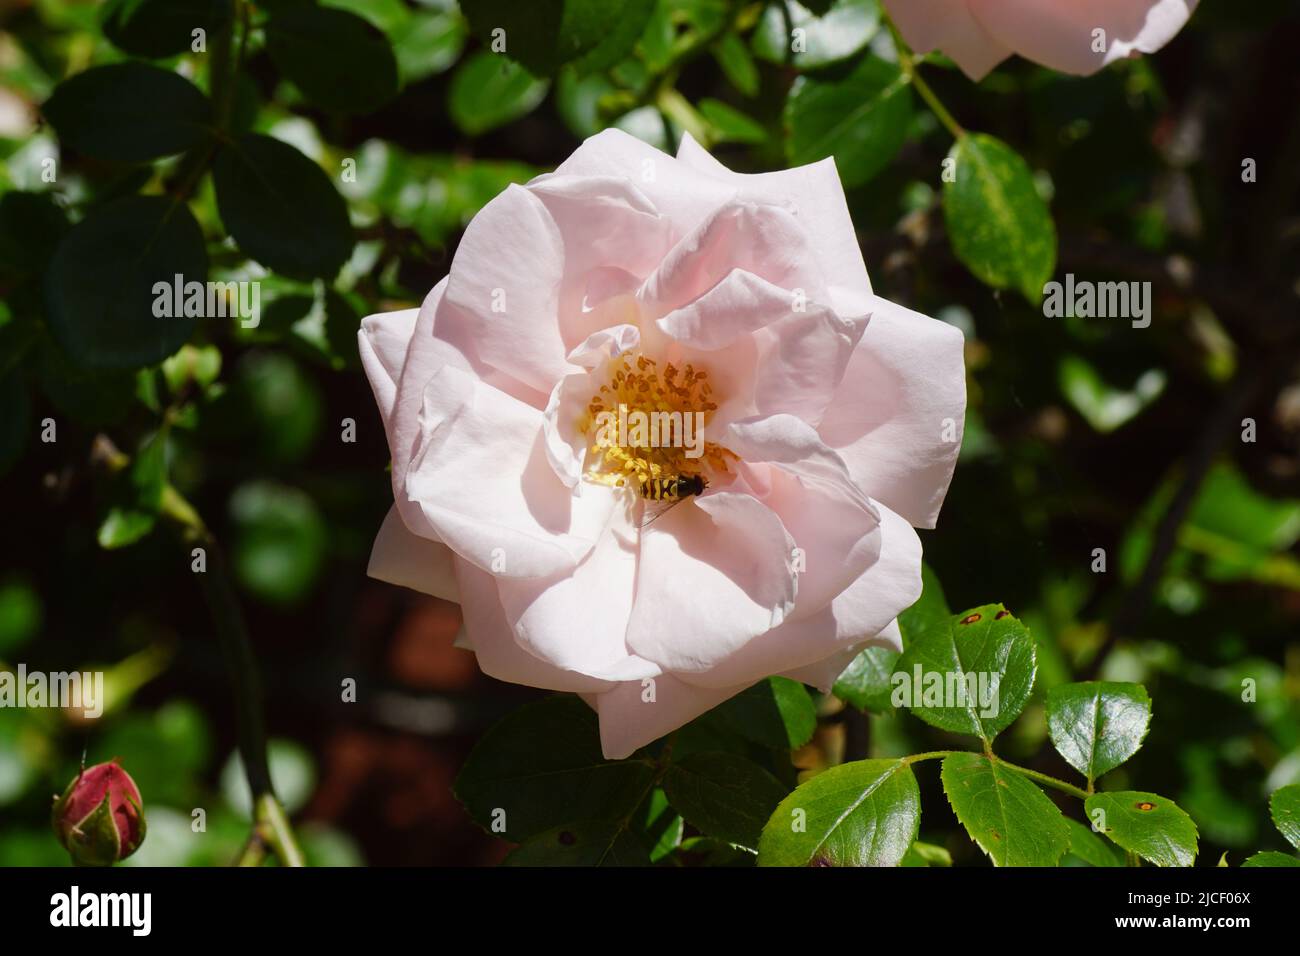 Close up of an open flower of a rose (Rosa New Dawn) with a hoverfly Epistrophe inside. Climbing rose. June, Dutch garden. Stock Photo